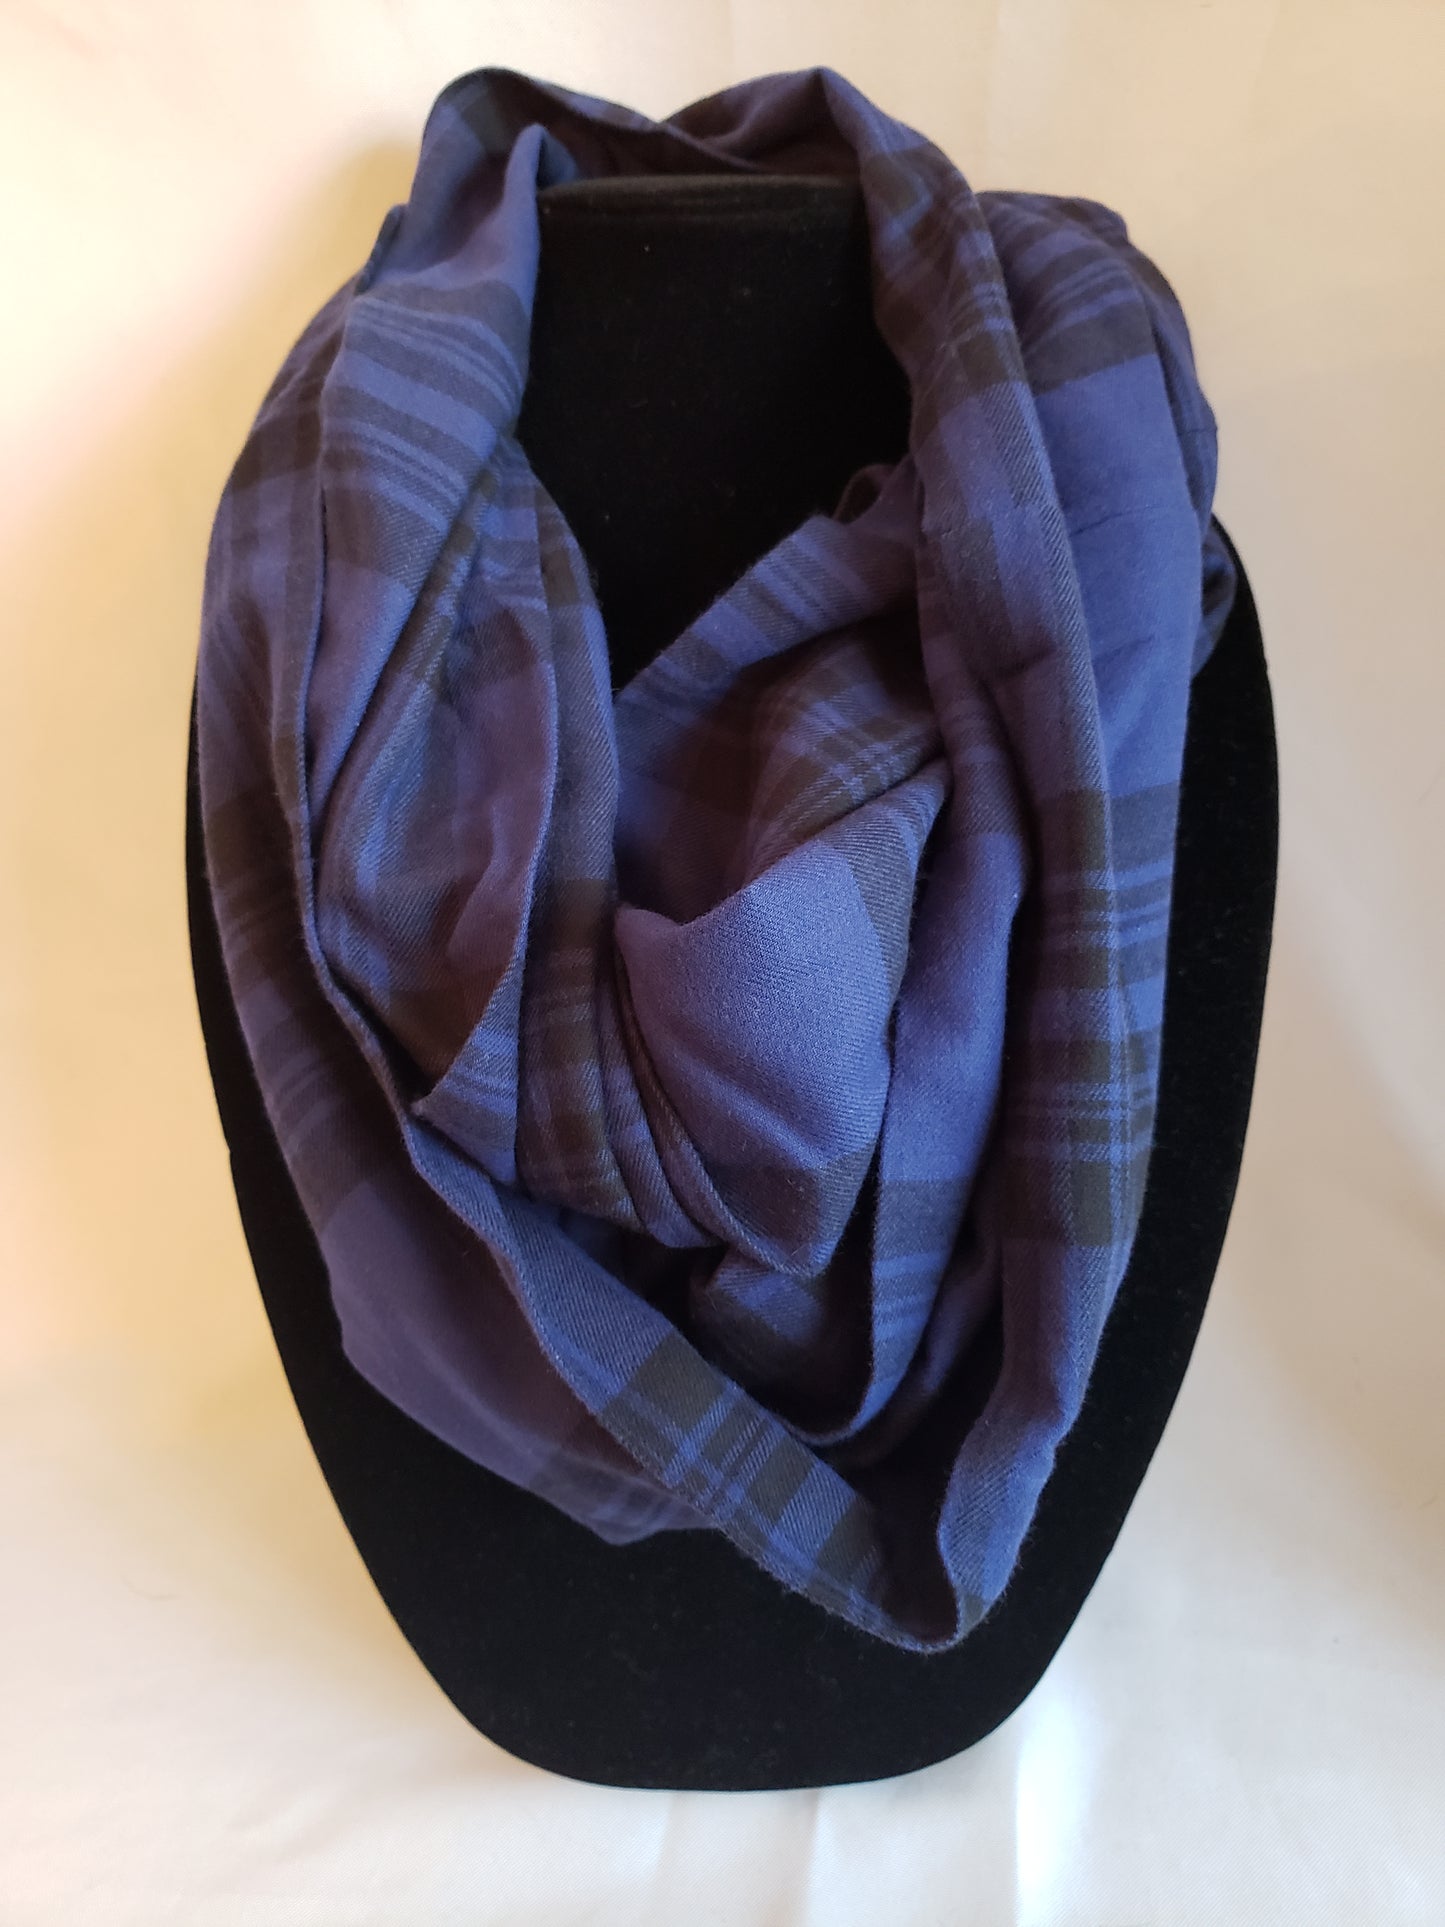 Autumn Infinity Scarf in Blue & Black Plaid